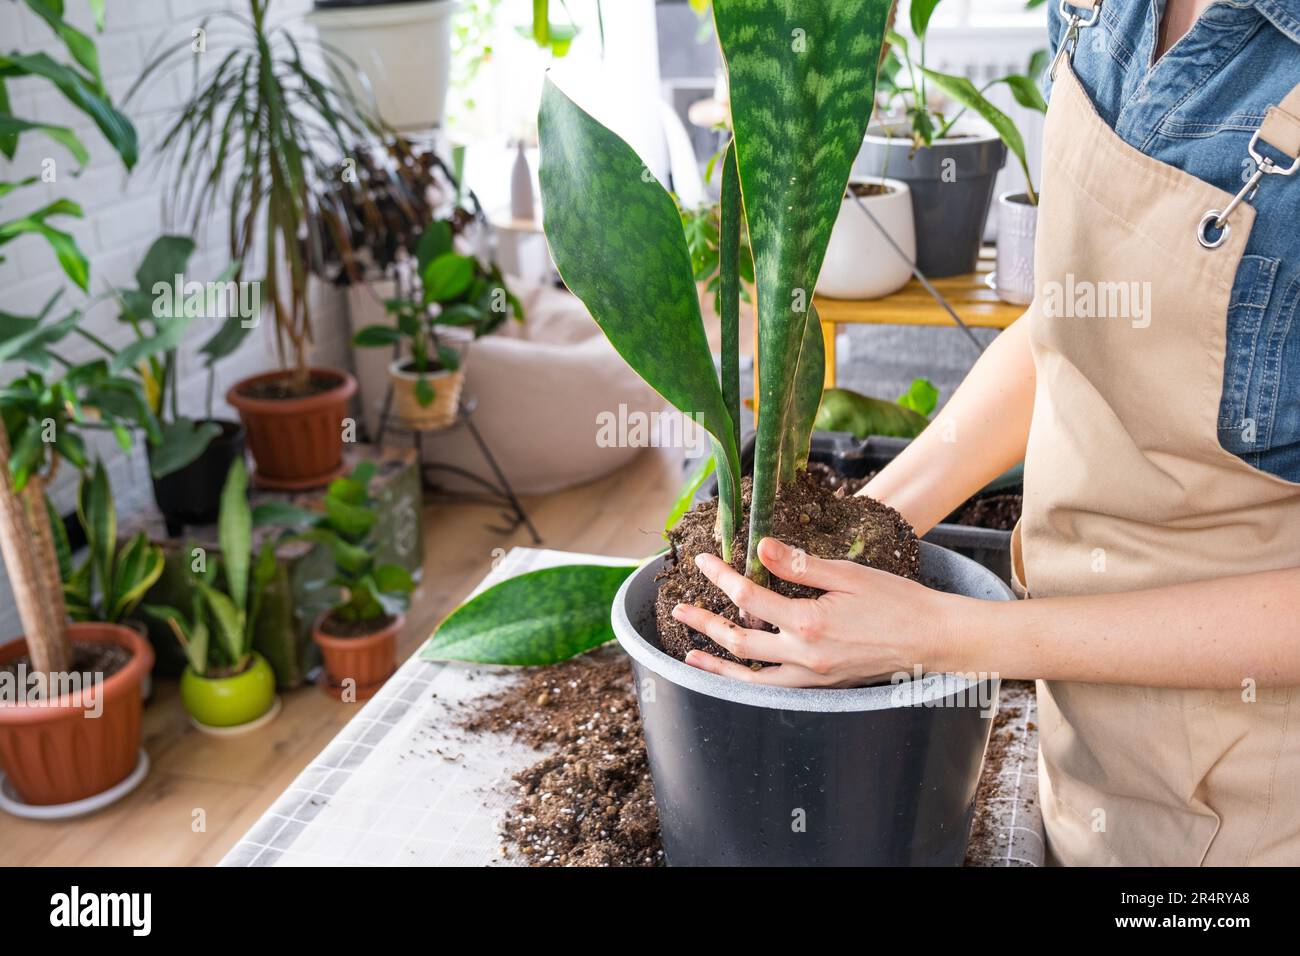 Repotting a home plant succulent sansevieria masoniana big leaf into new pot. Caring for potted plant, hands of woman in apron Stock Photo